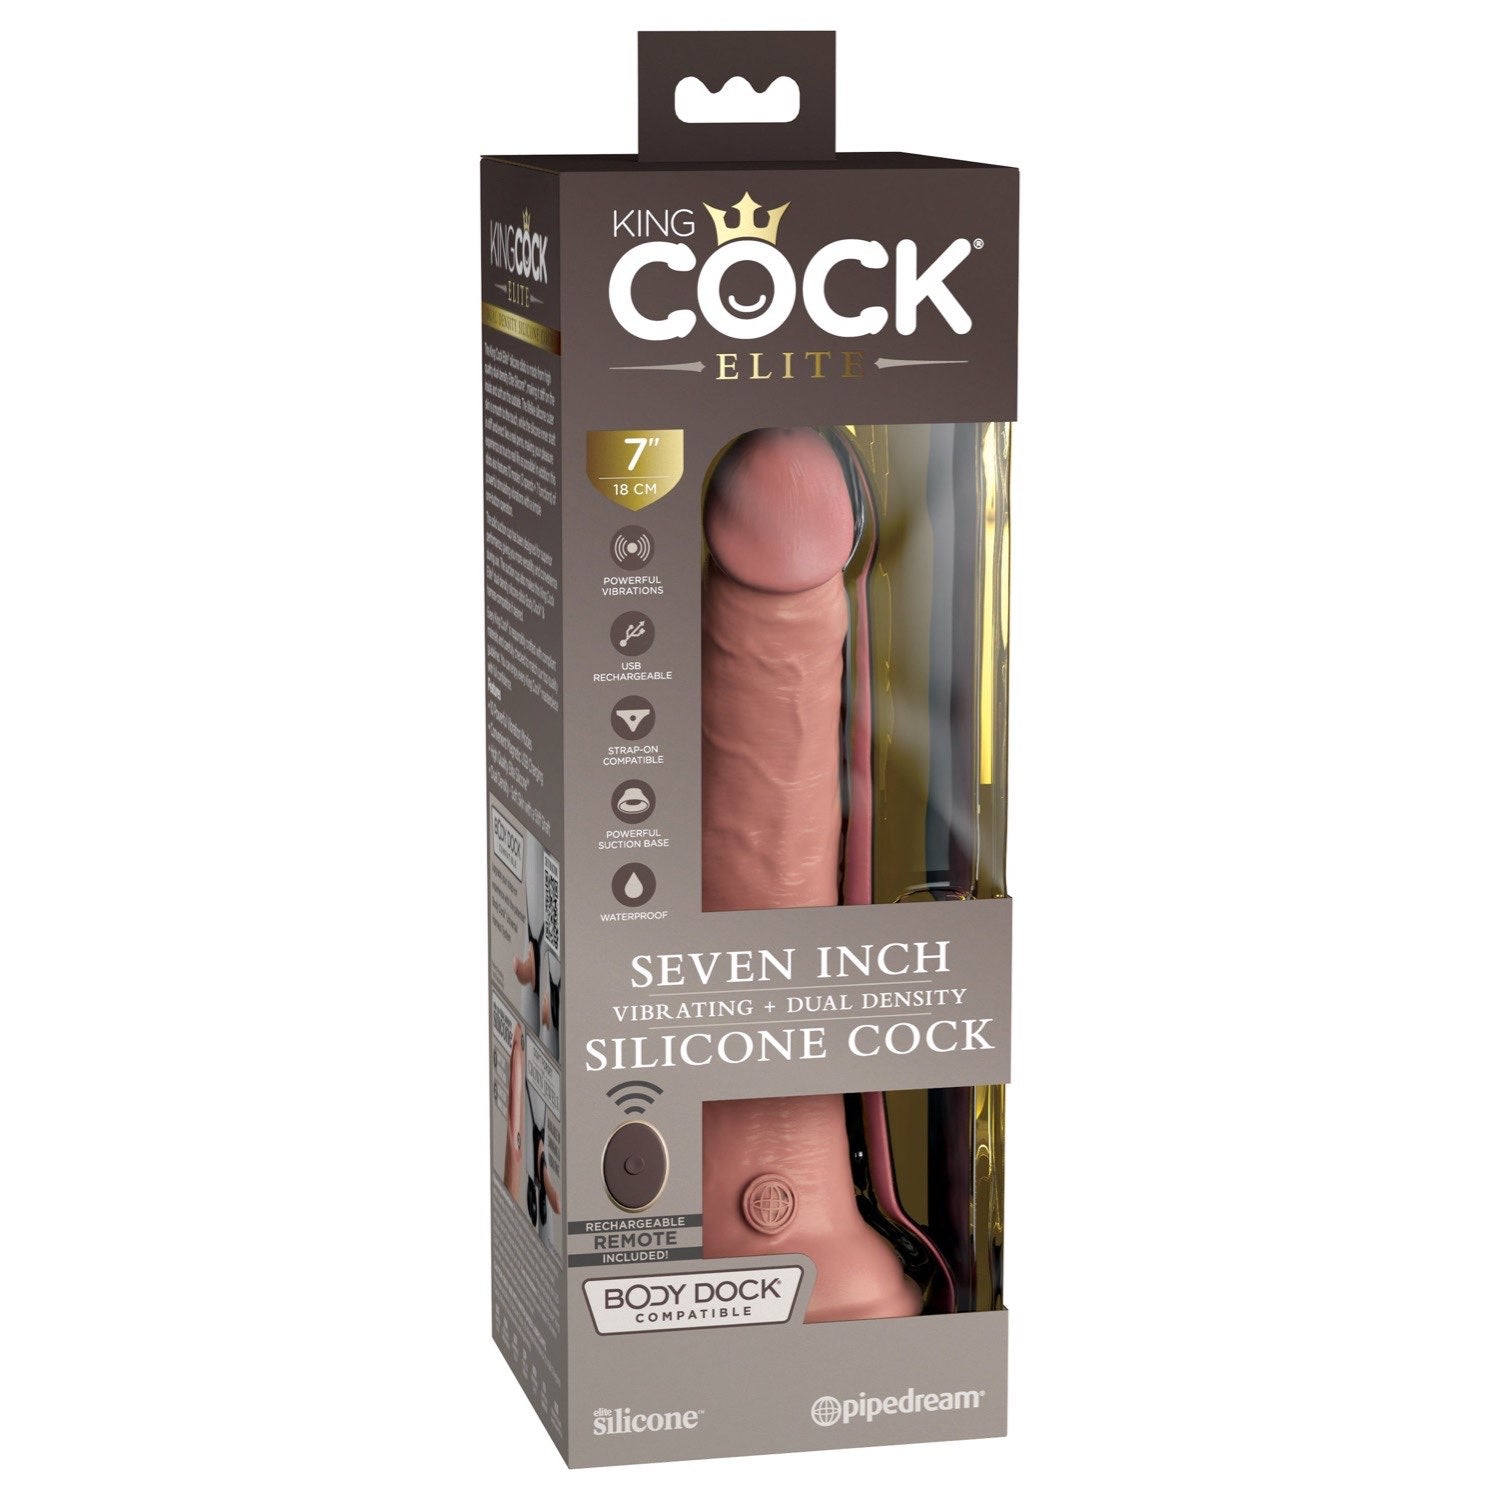 King Cock Elite 7&quot; Vibrating Dual Density Cock with Remote - Flesh 17.8 cm USB Rechargeable Vibrating Dong by Pipedream